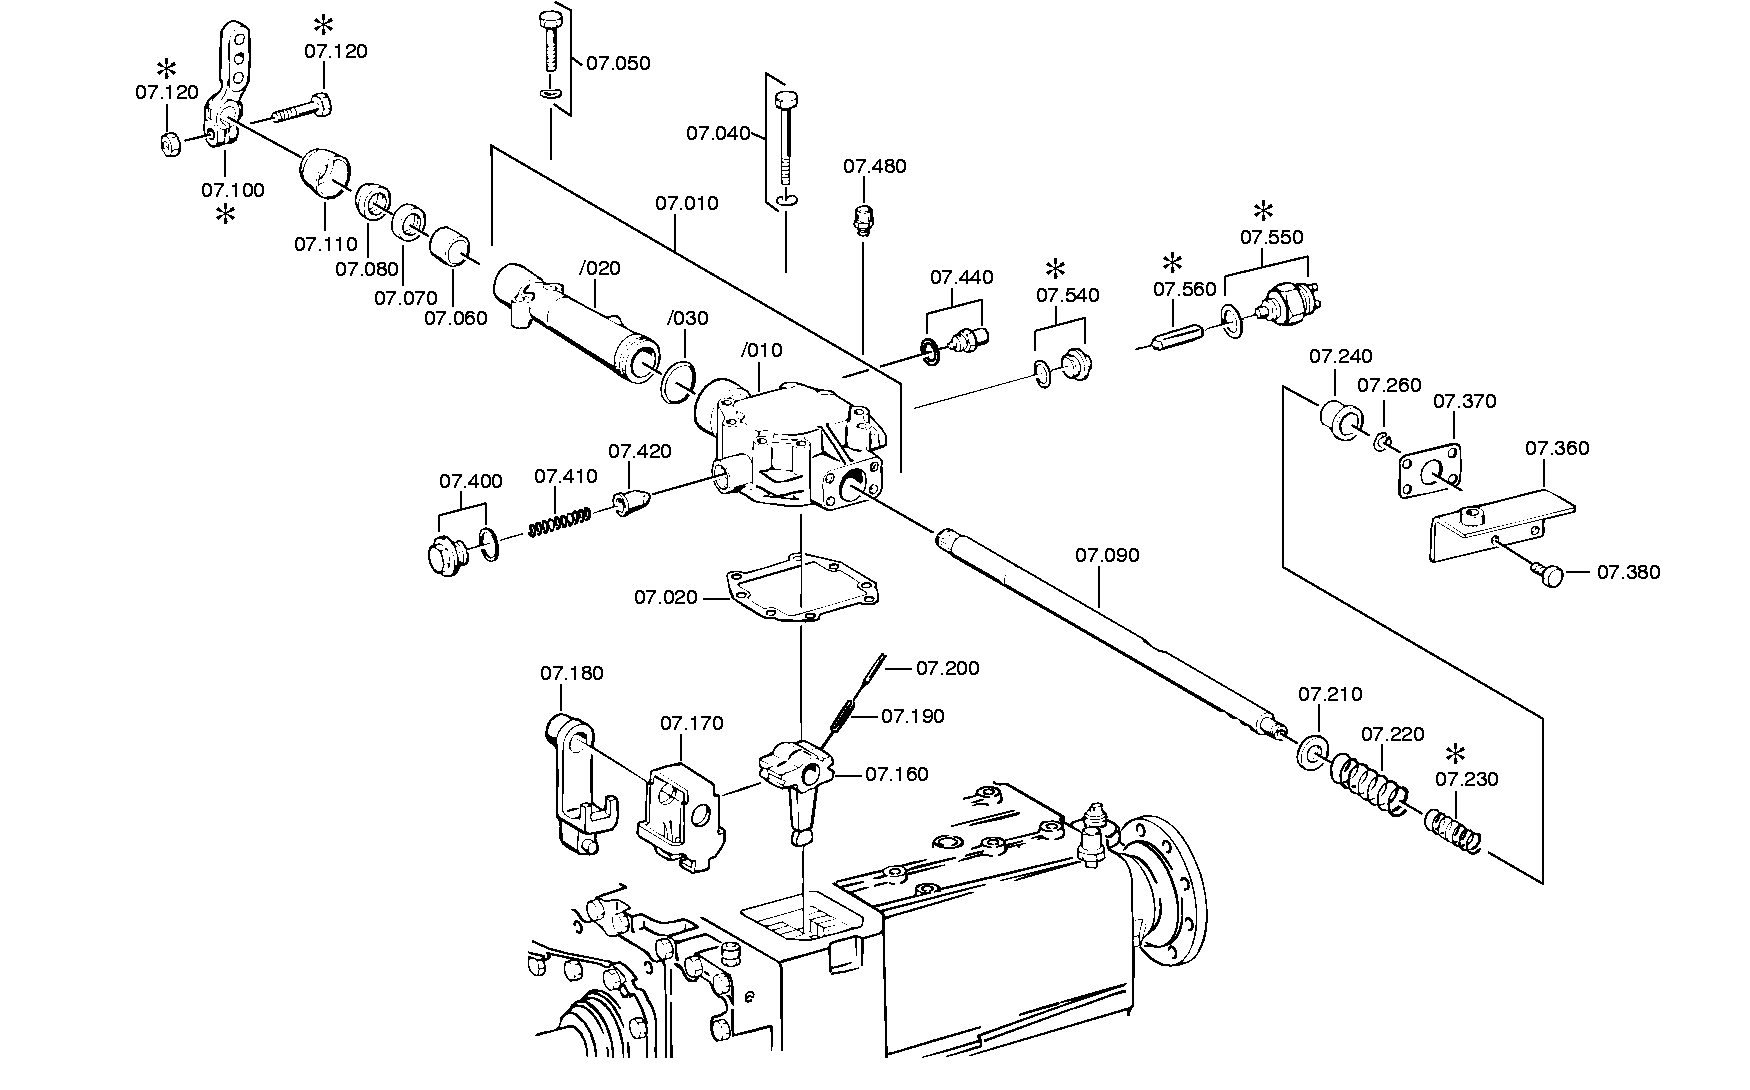 drawing for IVECO 193955 - DRIVER (figure 3)